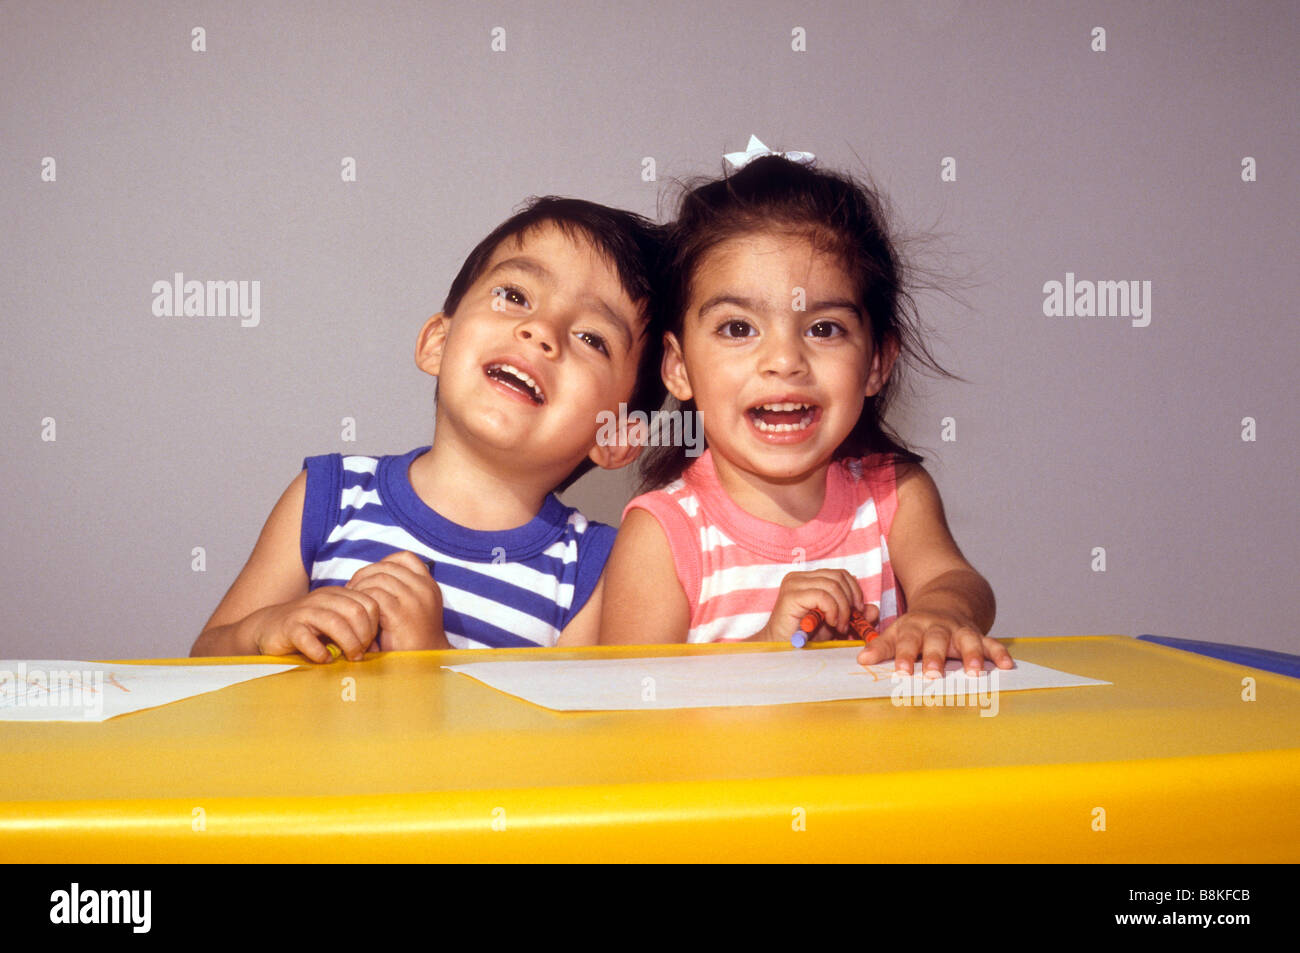 Twin Boy And Girl Teen High Resolution Stock Photography And Images Alamy